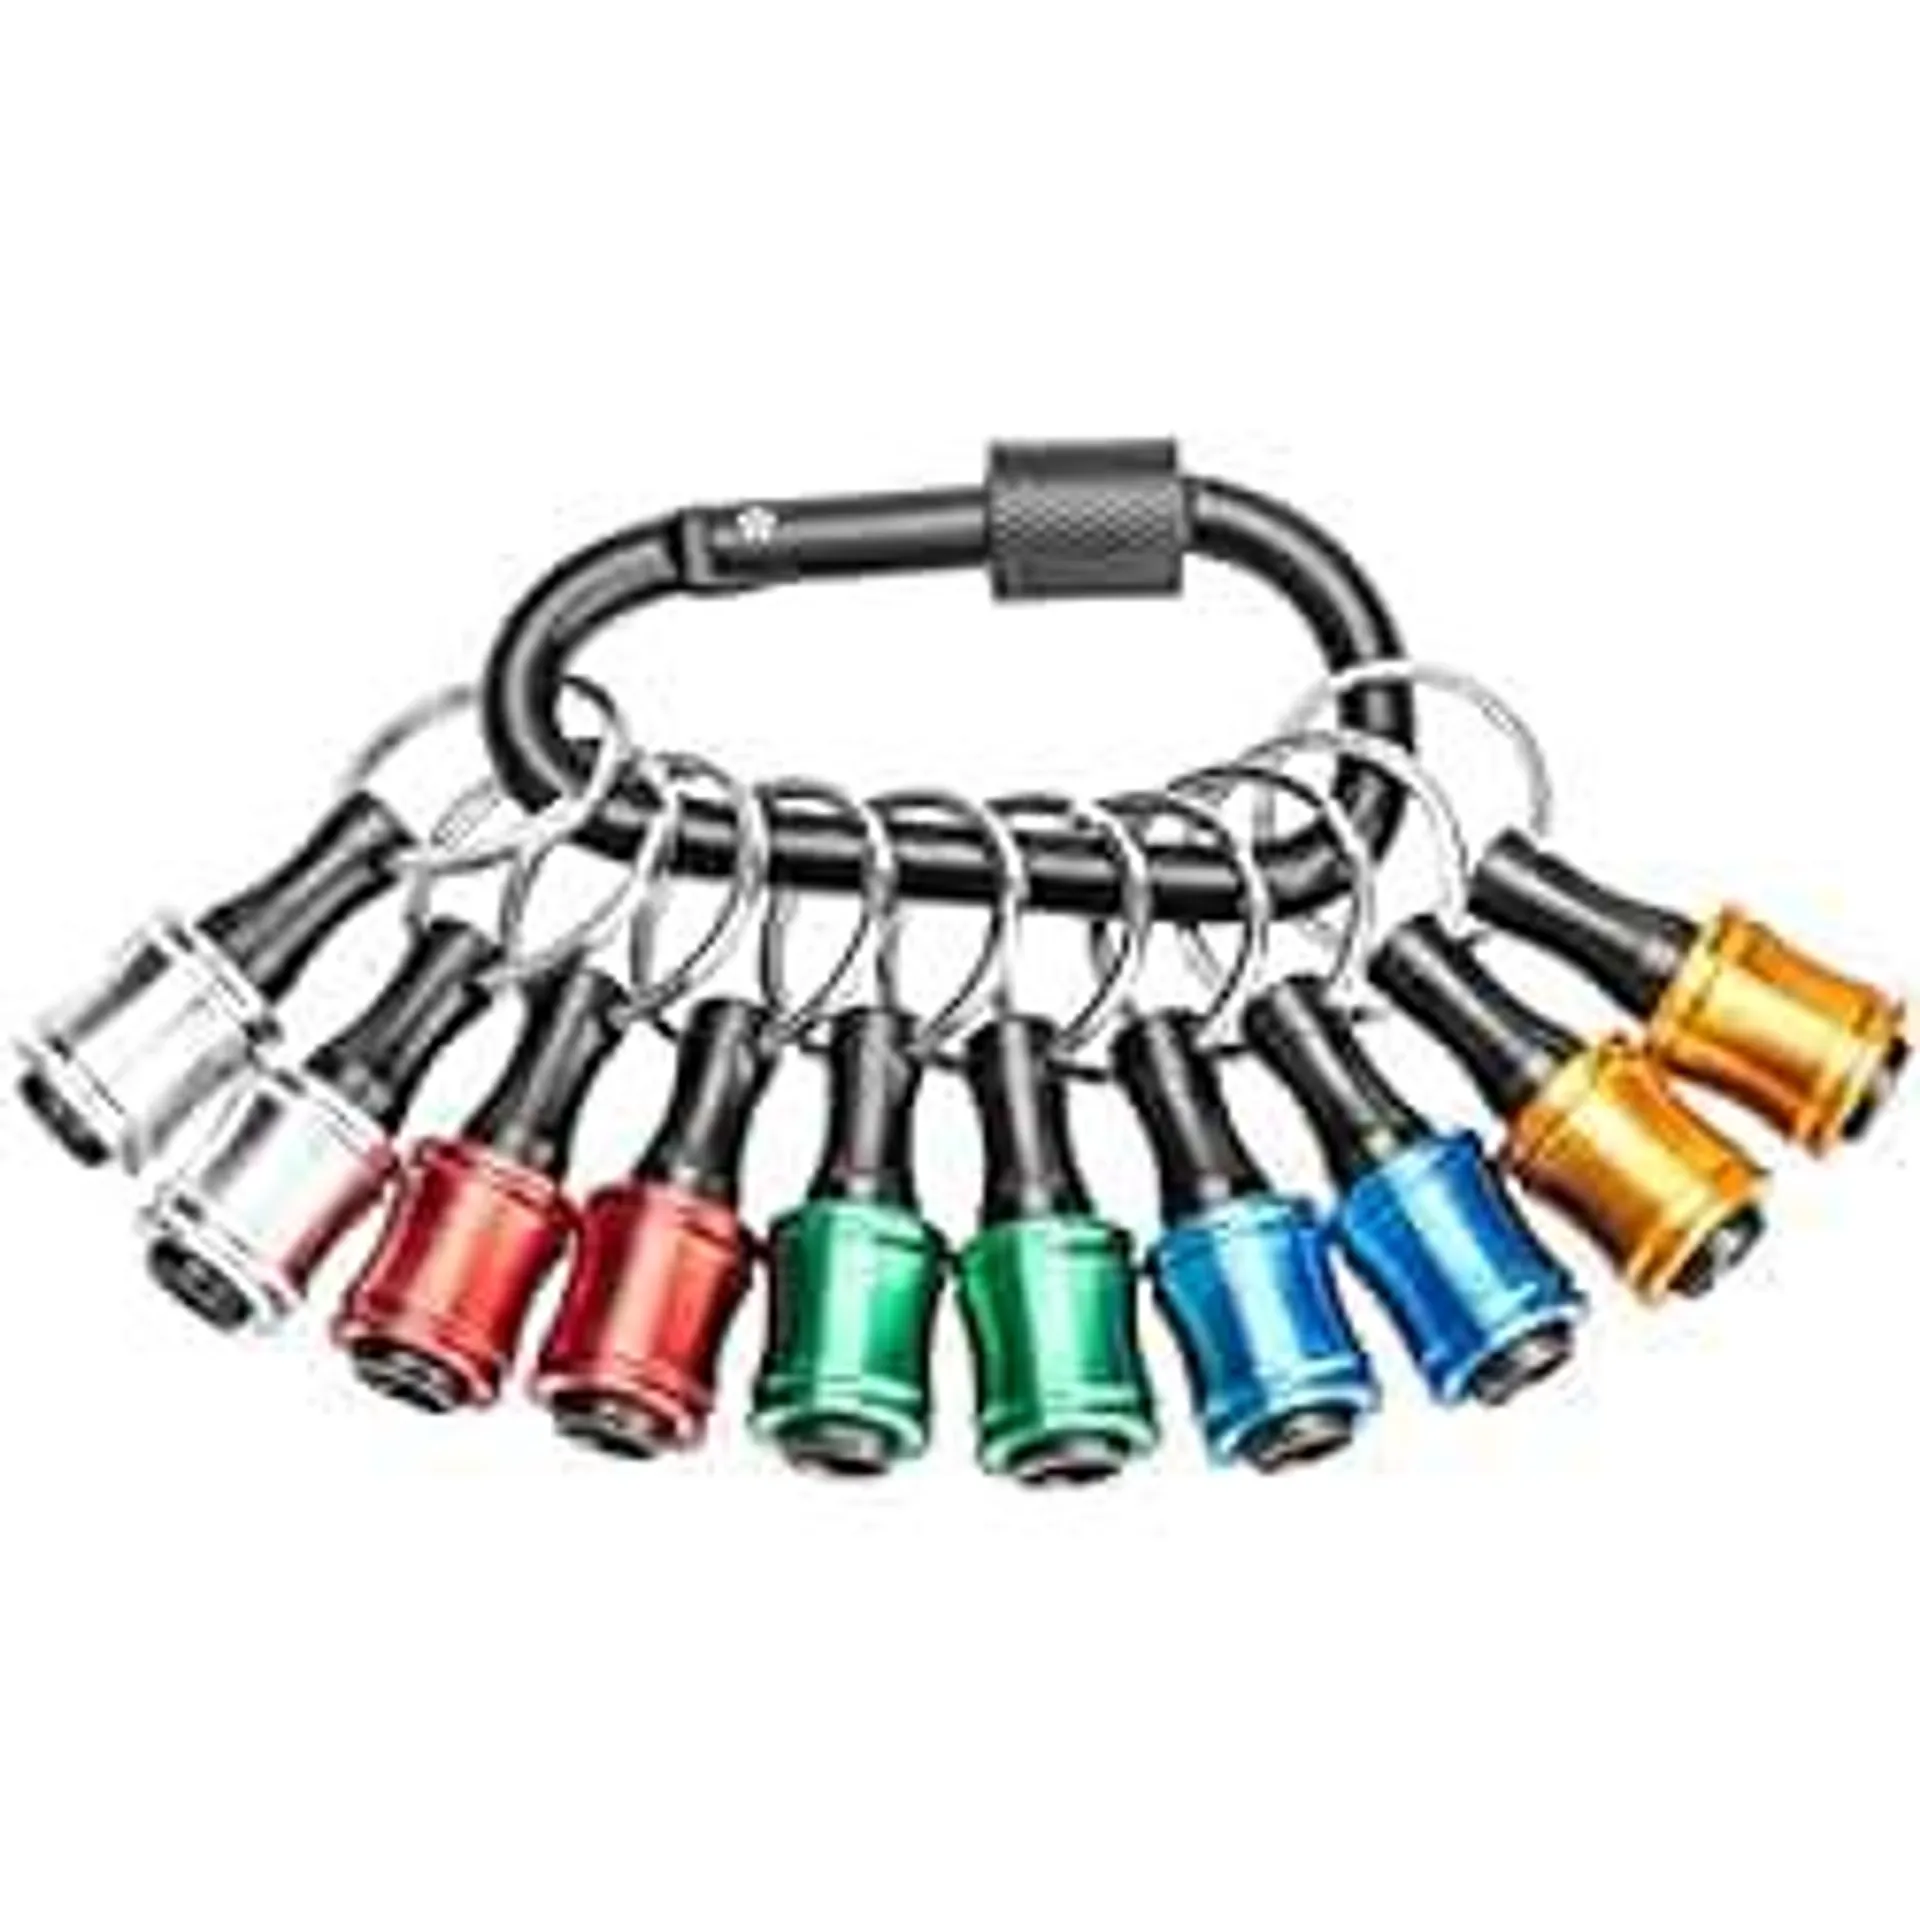 1/4 Inch Hex Shank Drill Bits Holder - Portable Six Color Coded Quick-Change Screwdriver Bits Holder Organizer Tool for 1/4" Impact Tips, Screws, Drivers, with Black Carabiner(Bits Not Include)(10pcs)